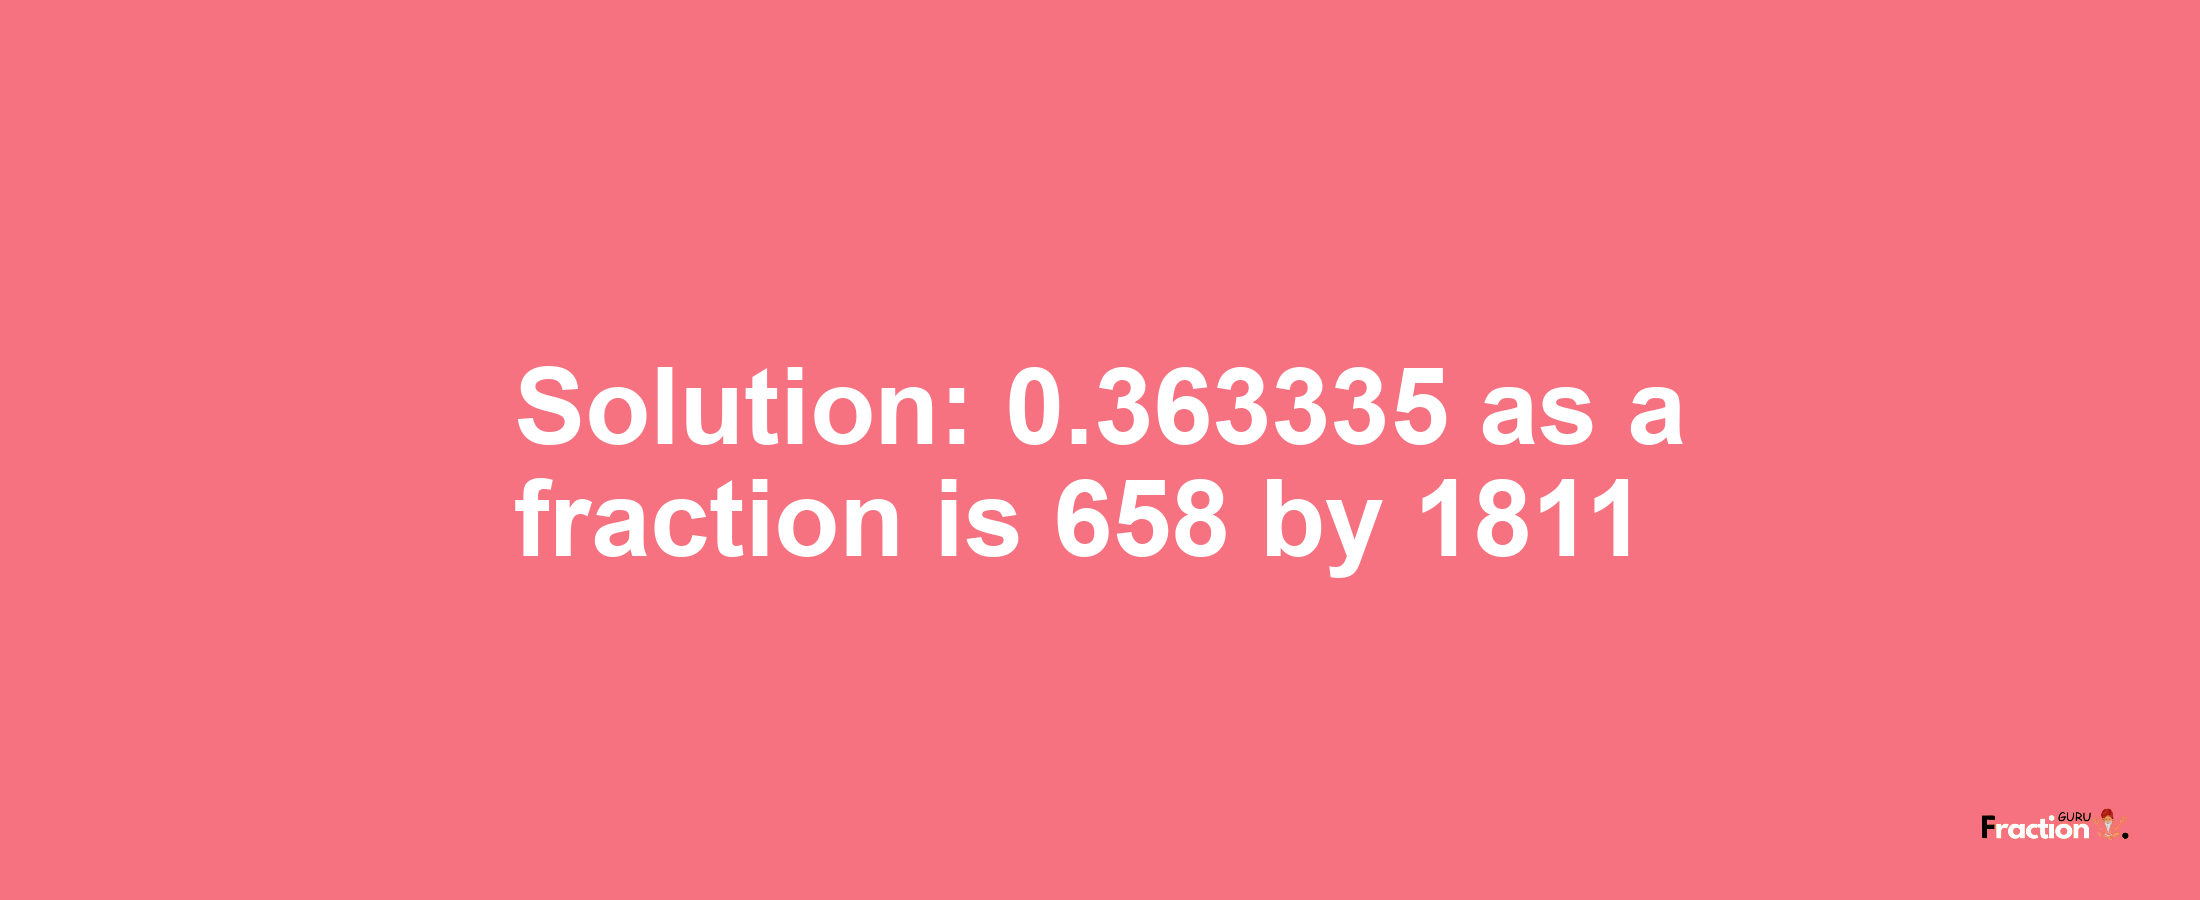 Solution:0.363335 as a fraction is 658/1811